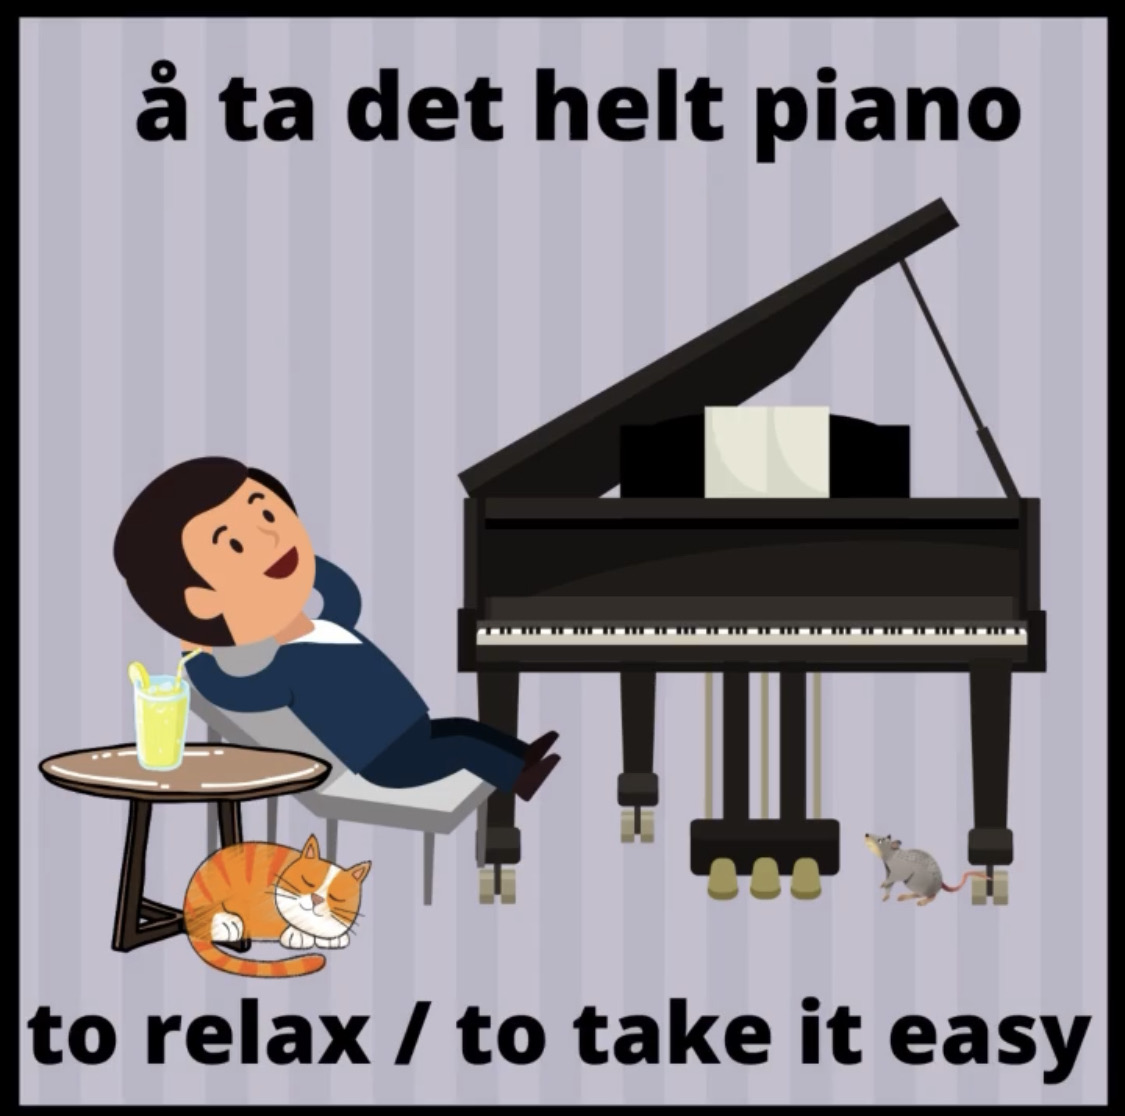 Image may contain: Musical instrument, Keyboard, Musical keyboard, Piano, Pianist.